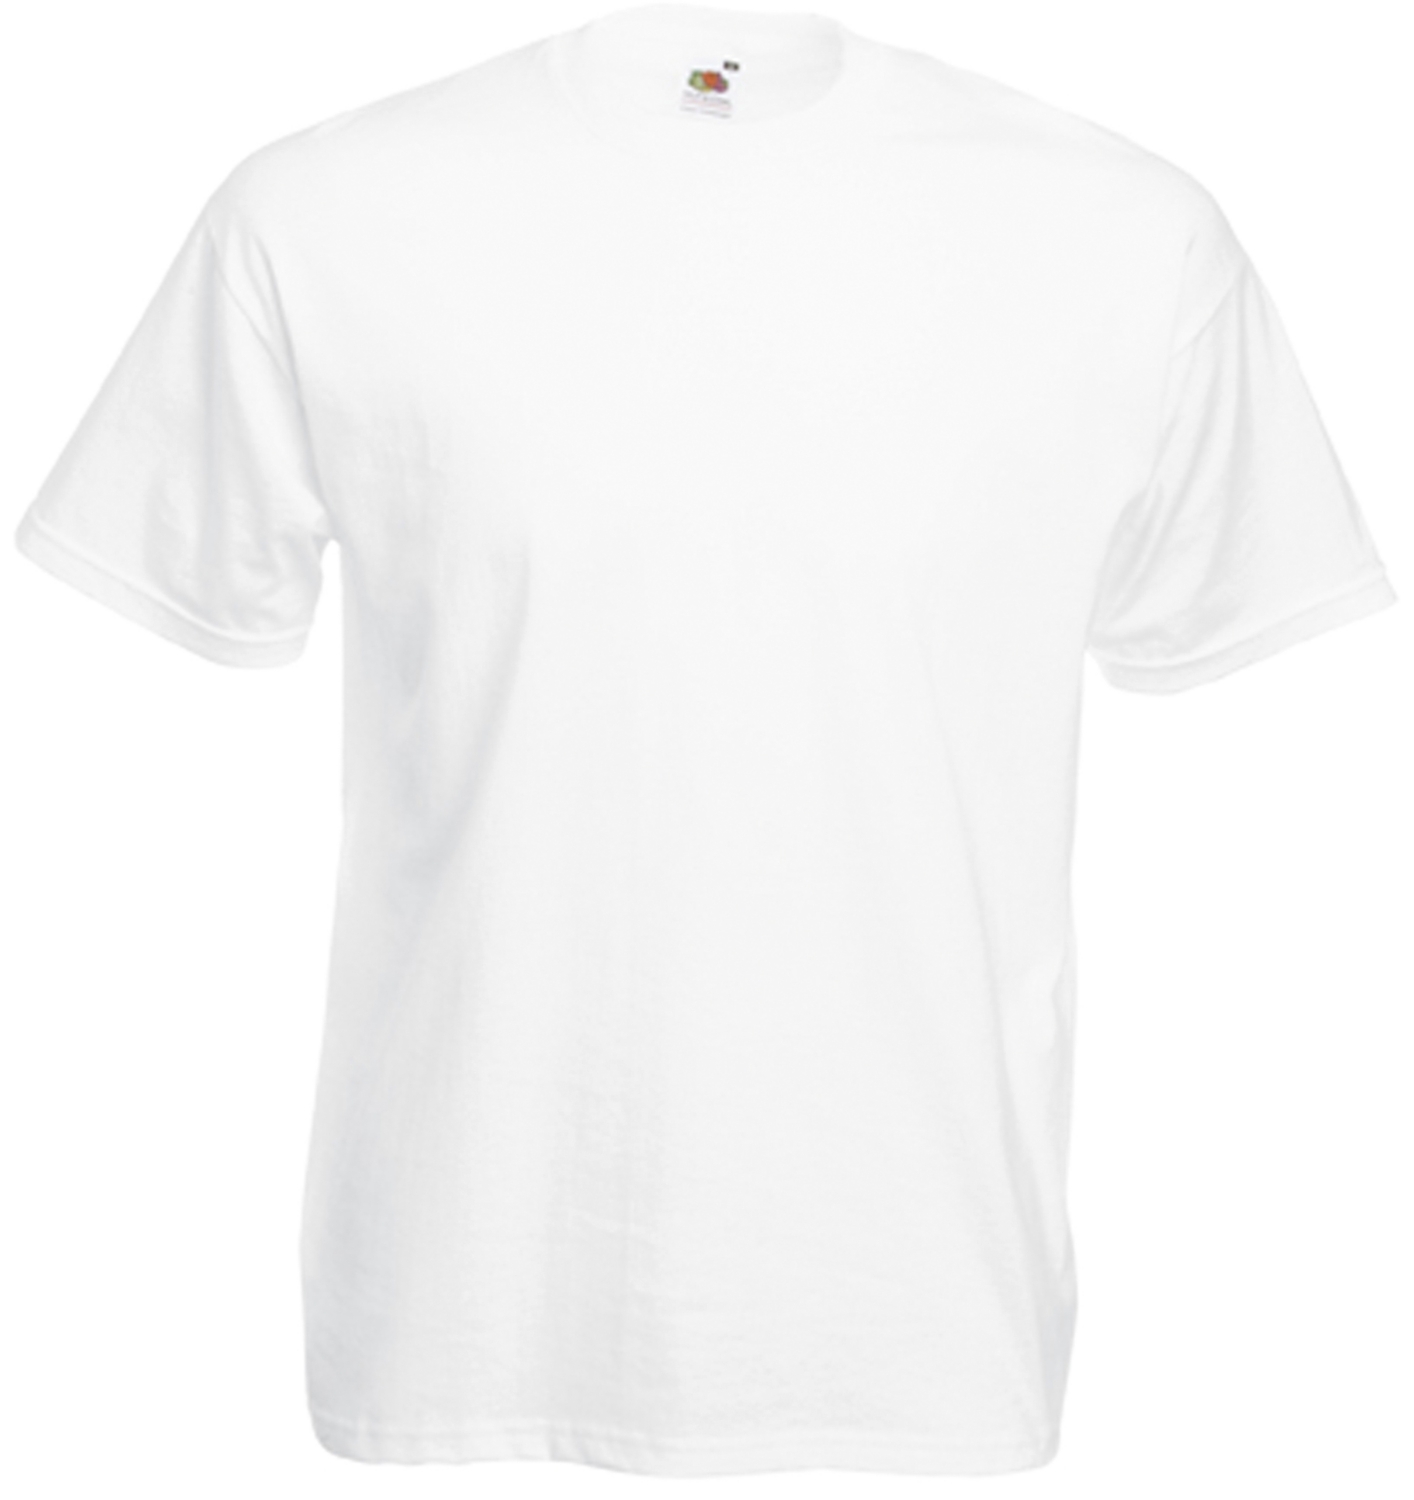 Tee-shirt Value-Weight - Blanc Fruit Of The Loom